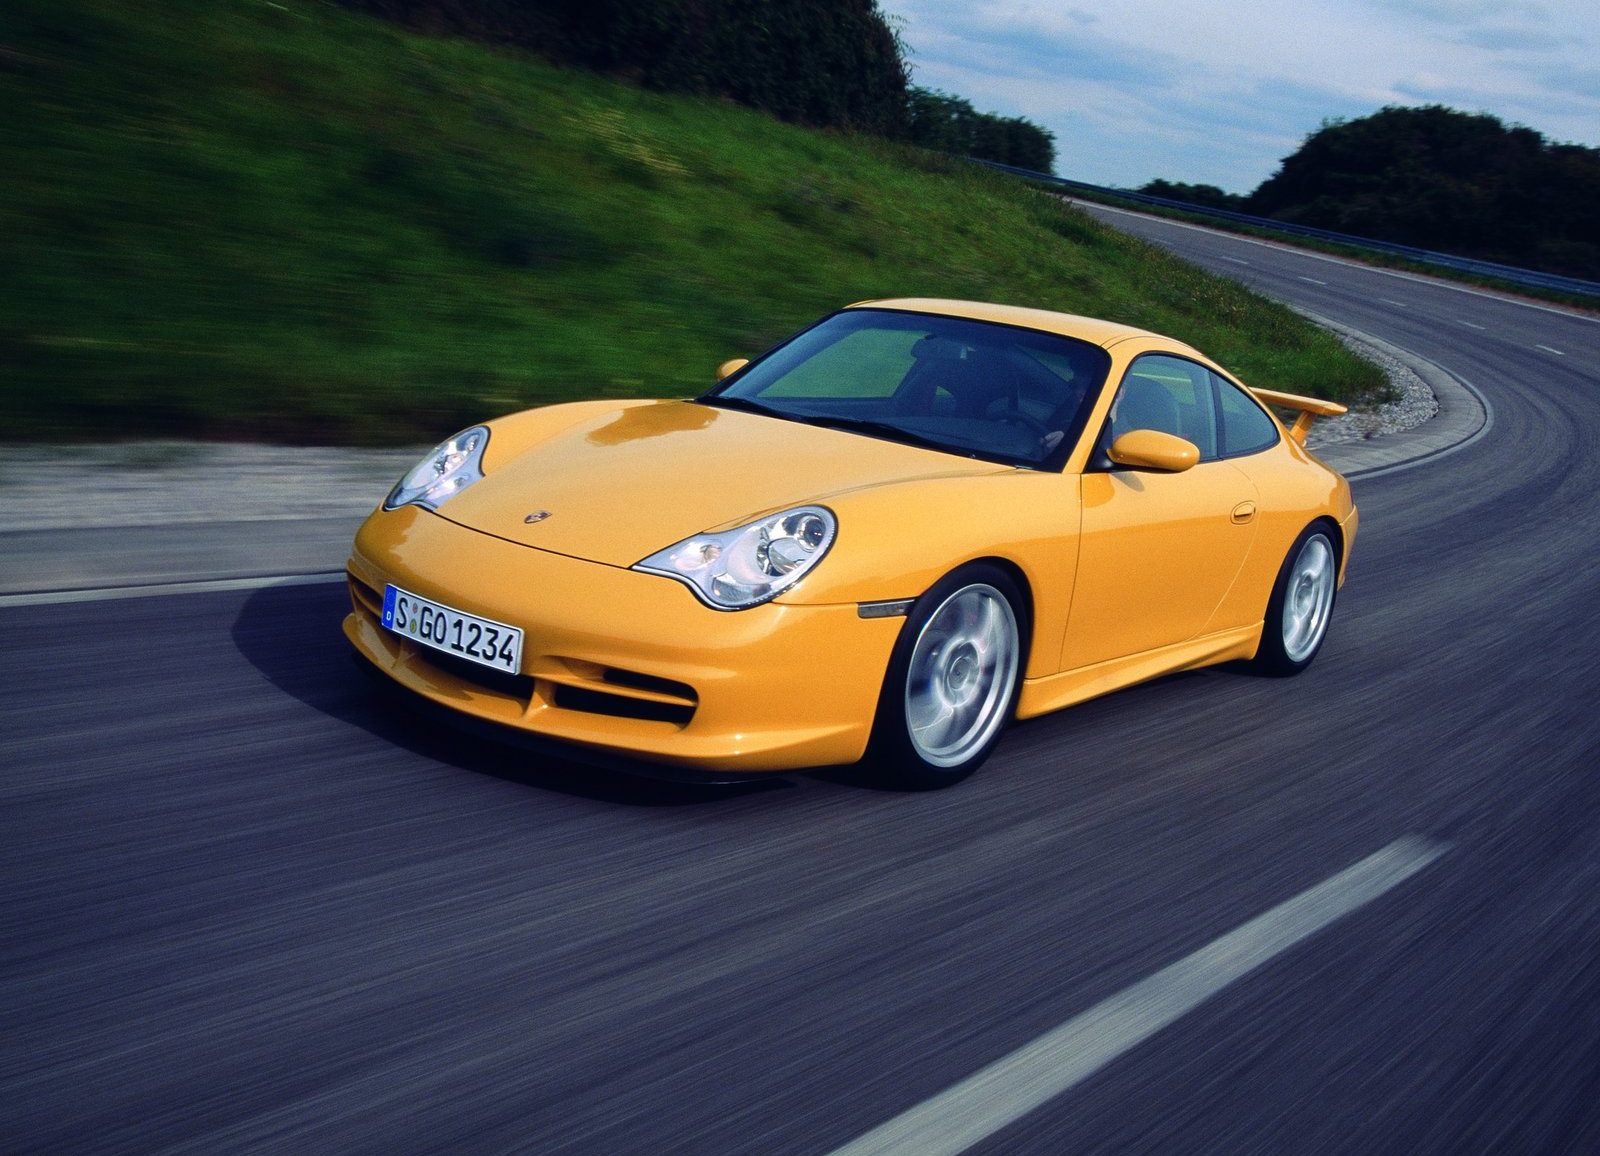 An image of a yellow Porsche 911 GT3 driving on a road.